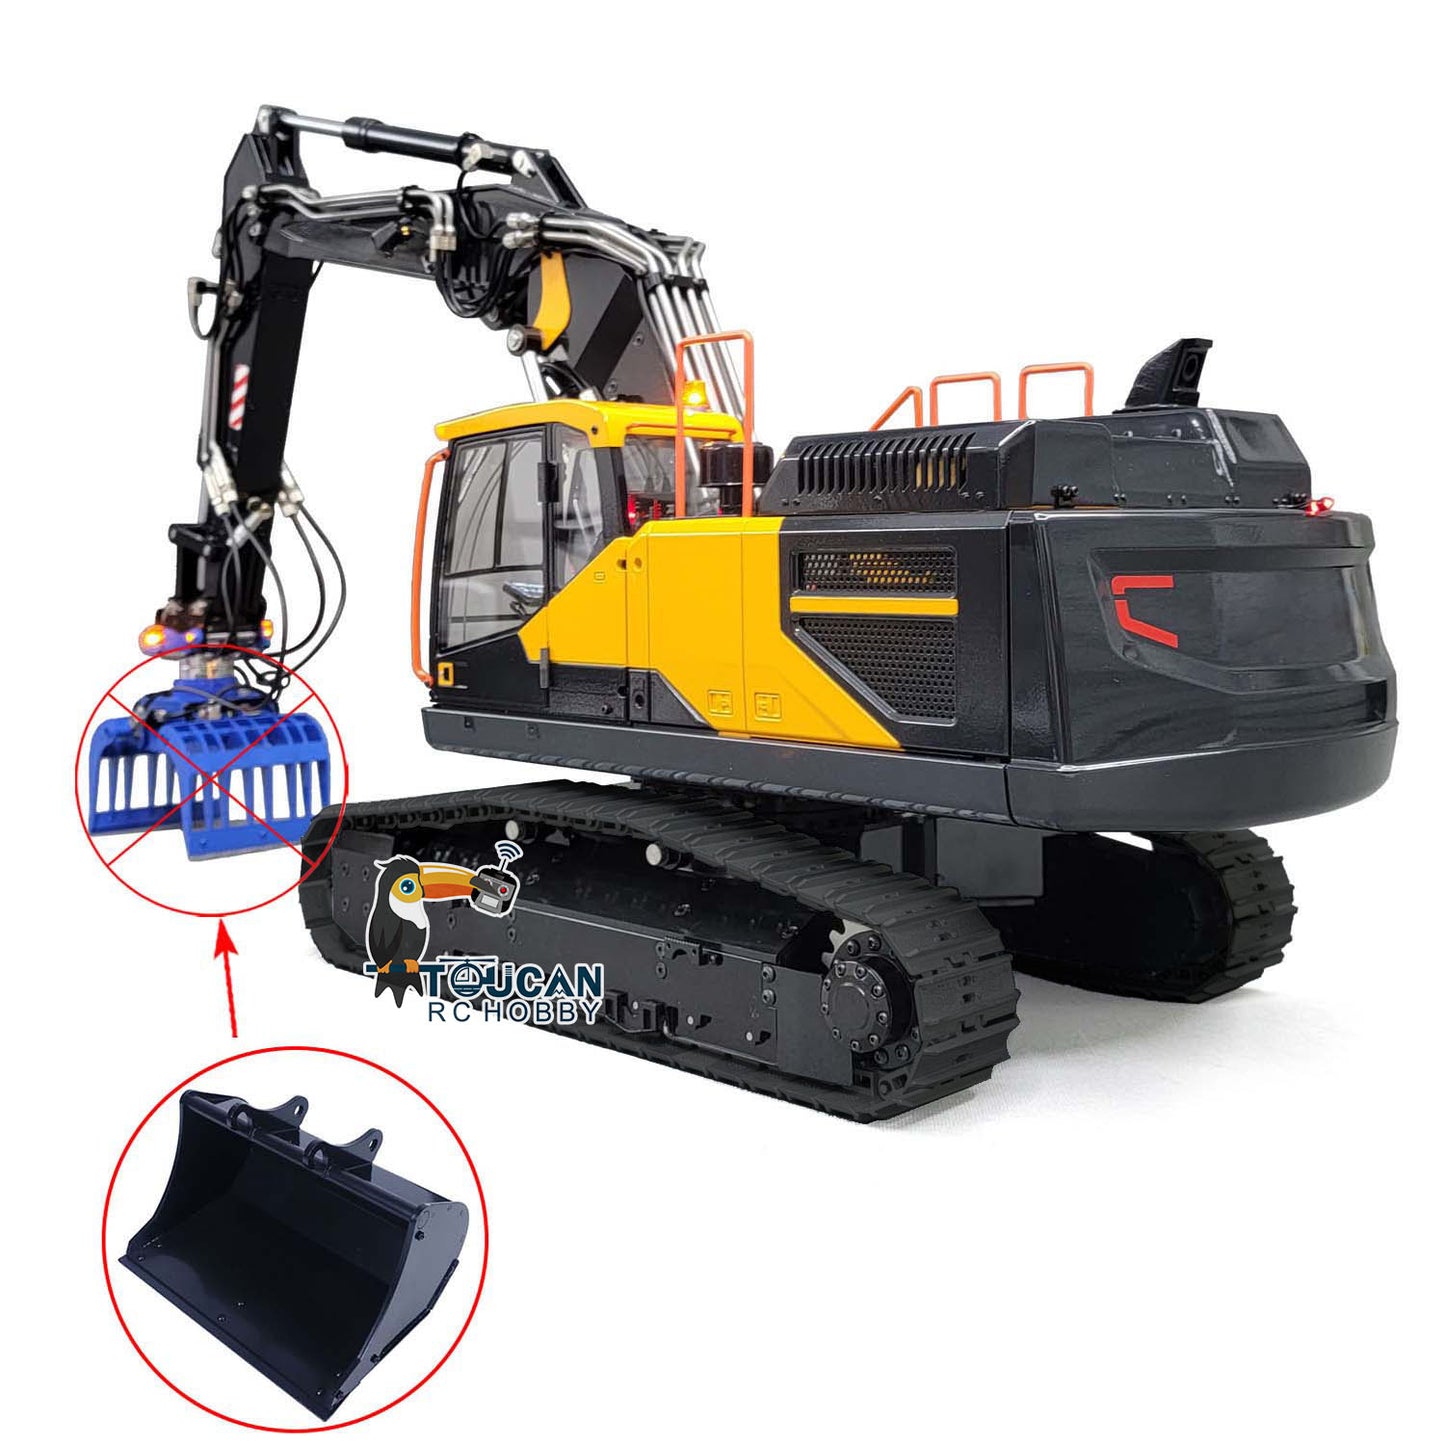 1:14 EC380 RC Excavator Hydraulic Tracked 3 Arms Remote Control Diggers